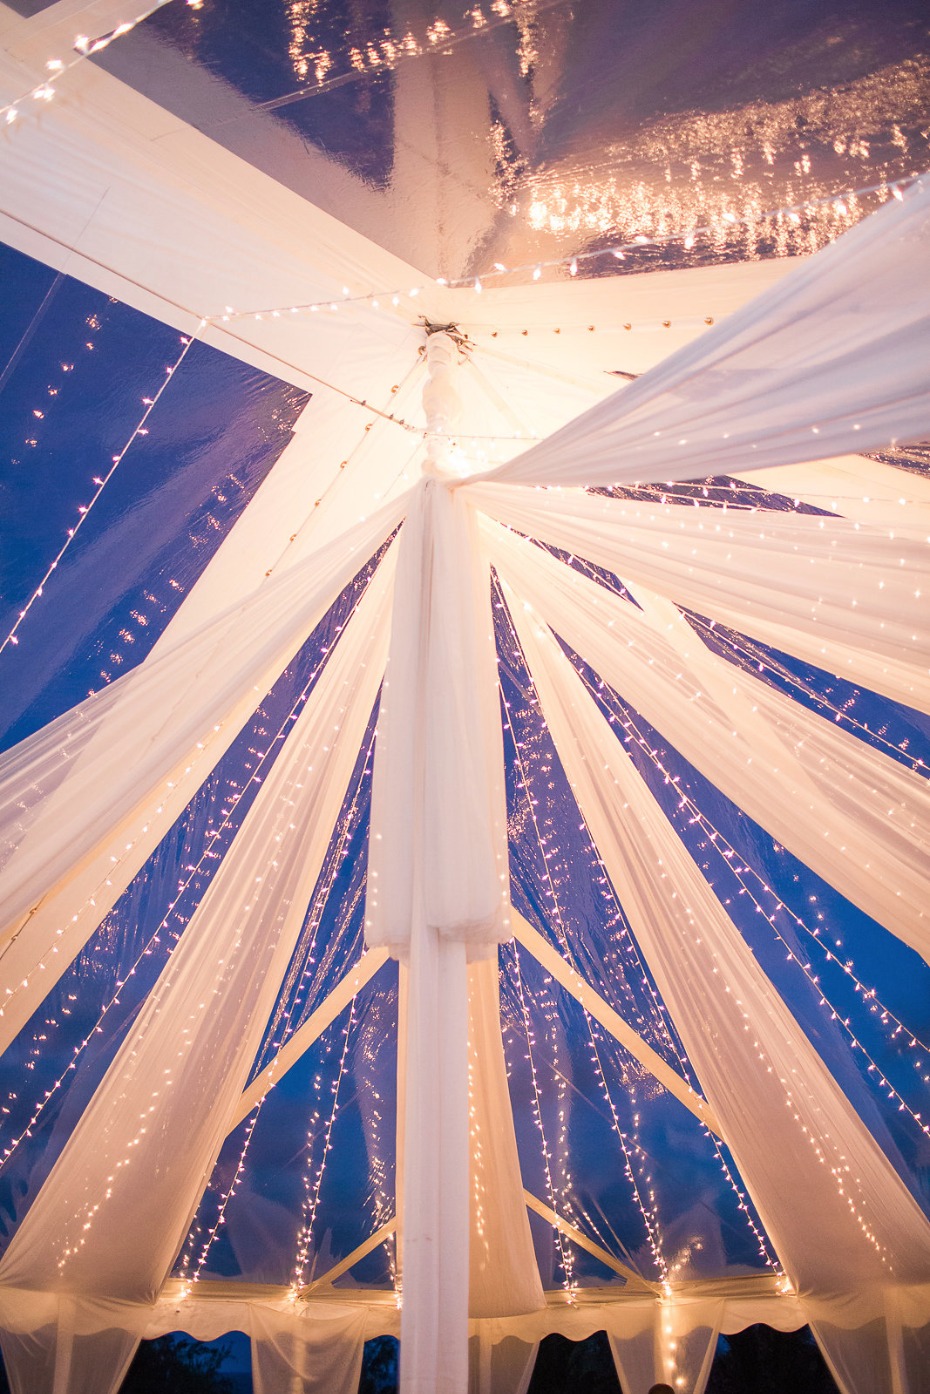 Lighting and drapery ideas for a tent wedding